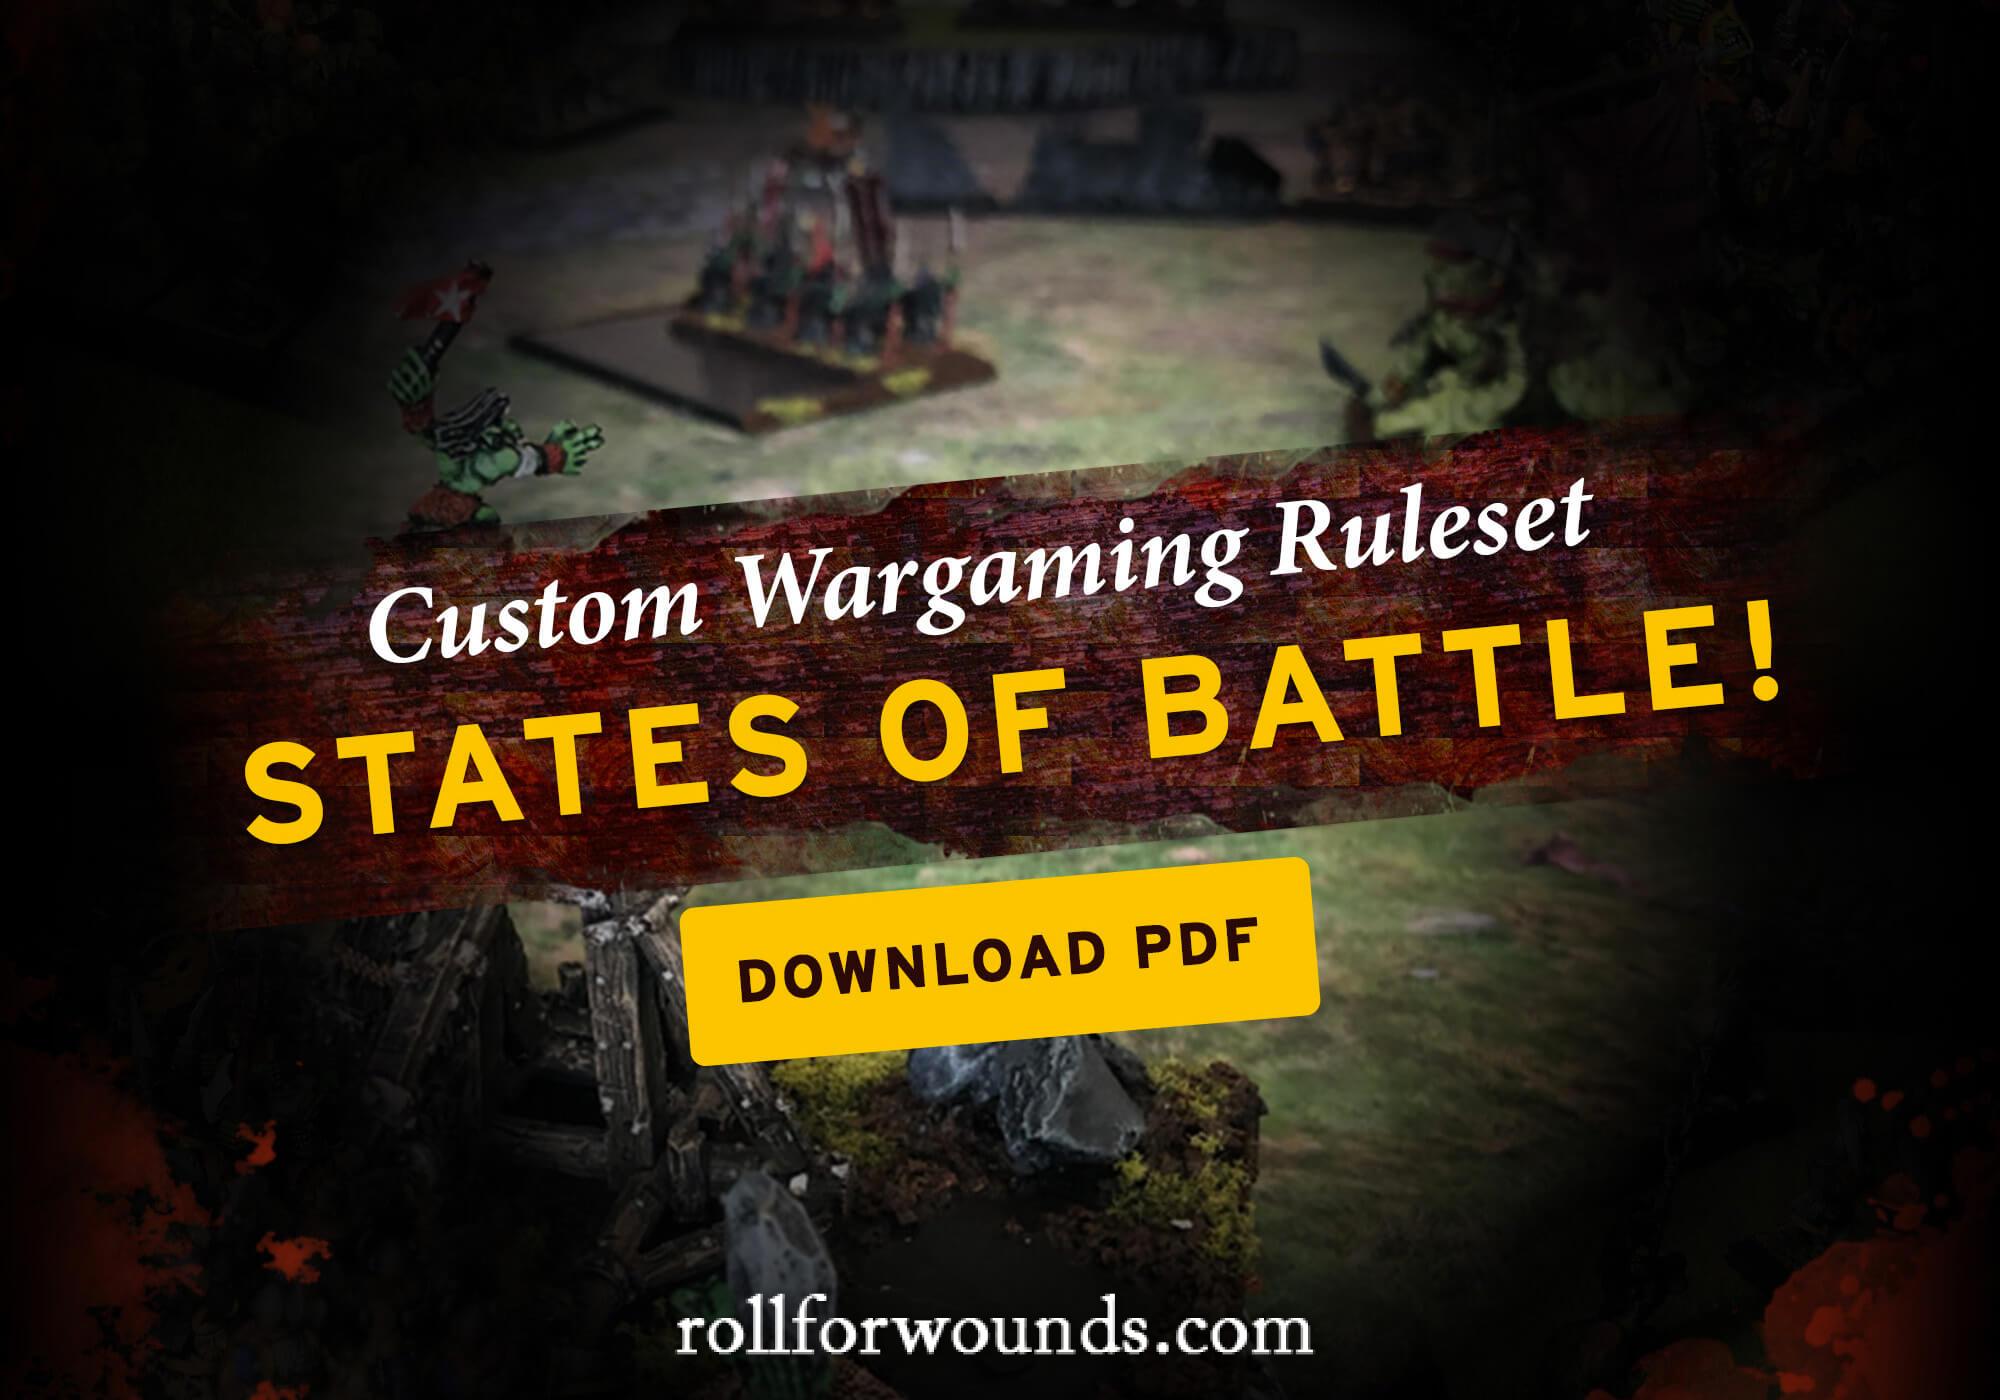 States of Battle wargaming rules